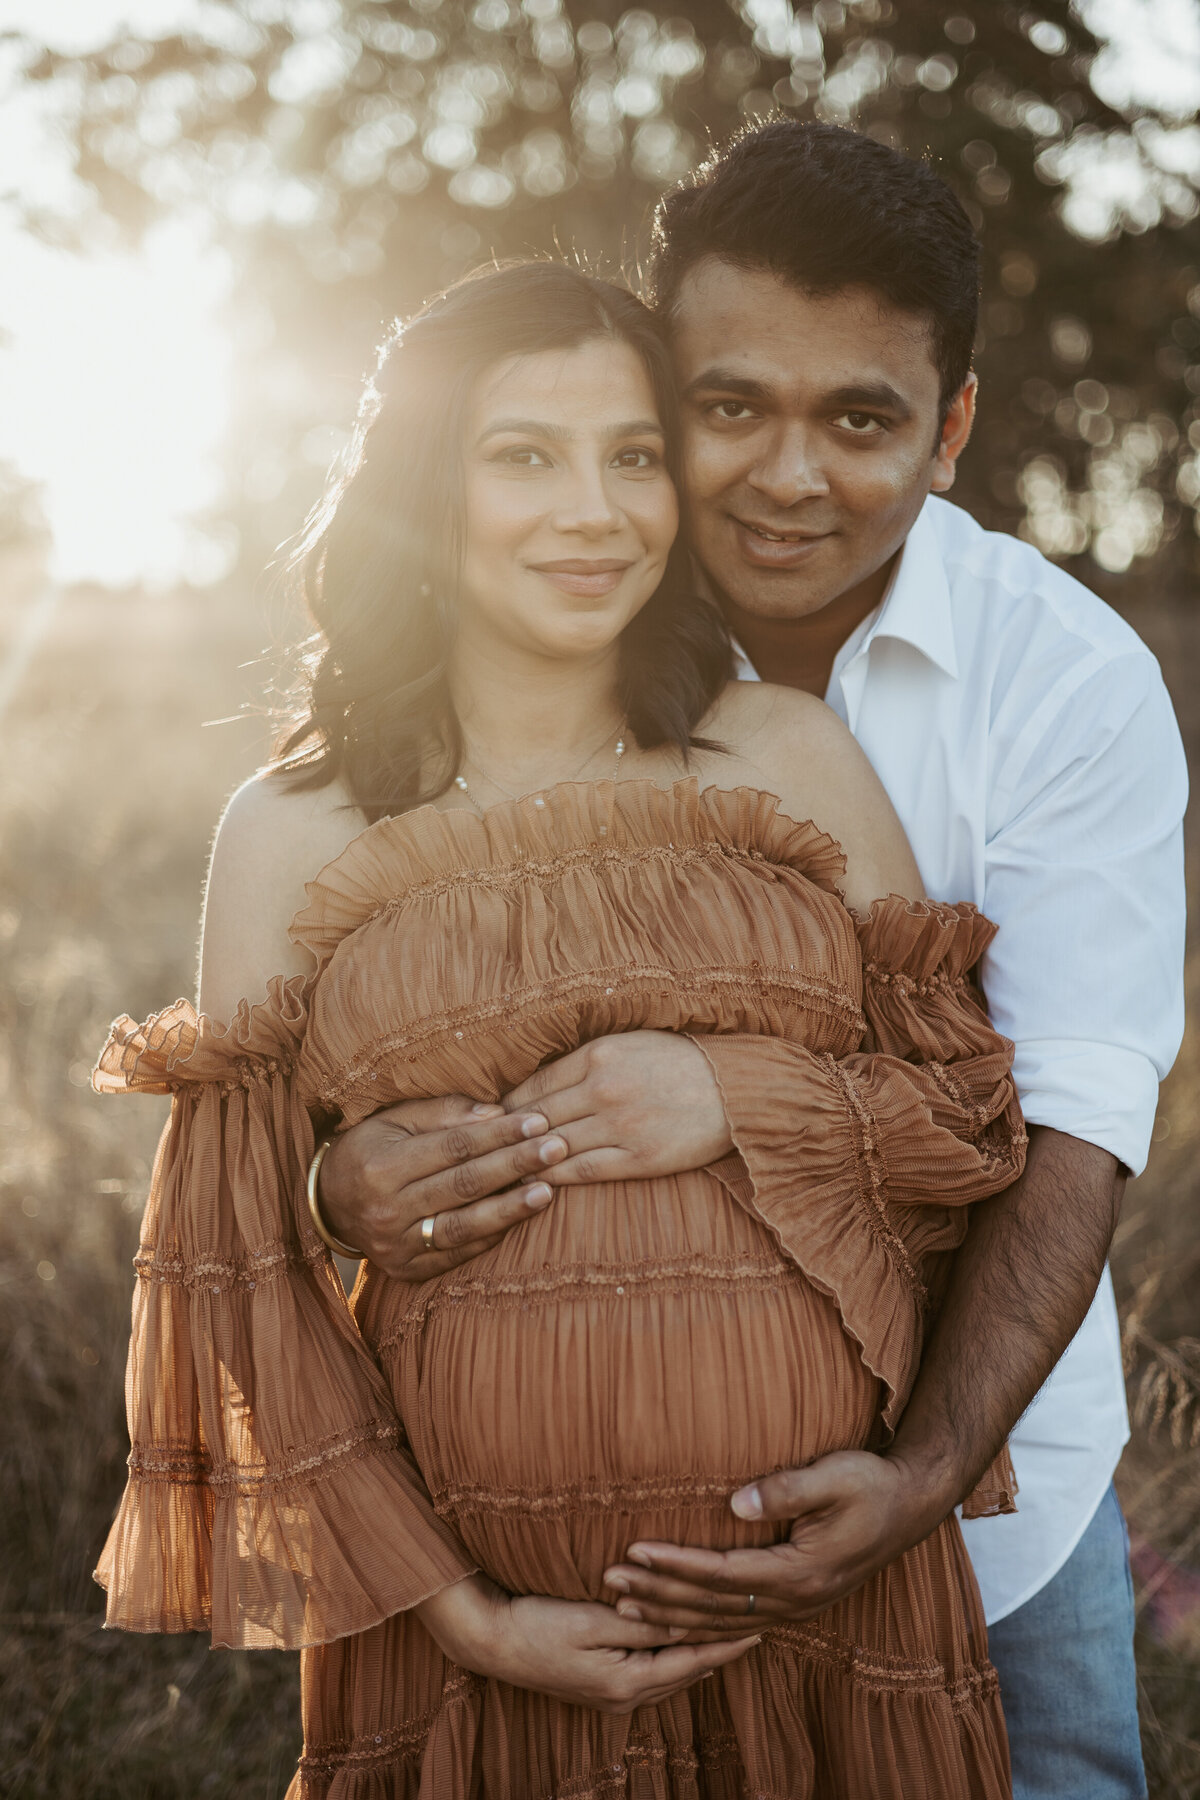 Parents cradling mama's pregnant bump while gazing straight at the camera